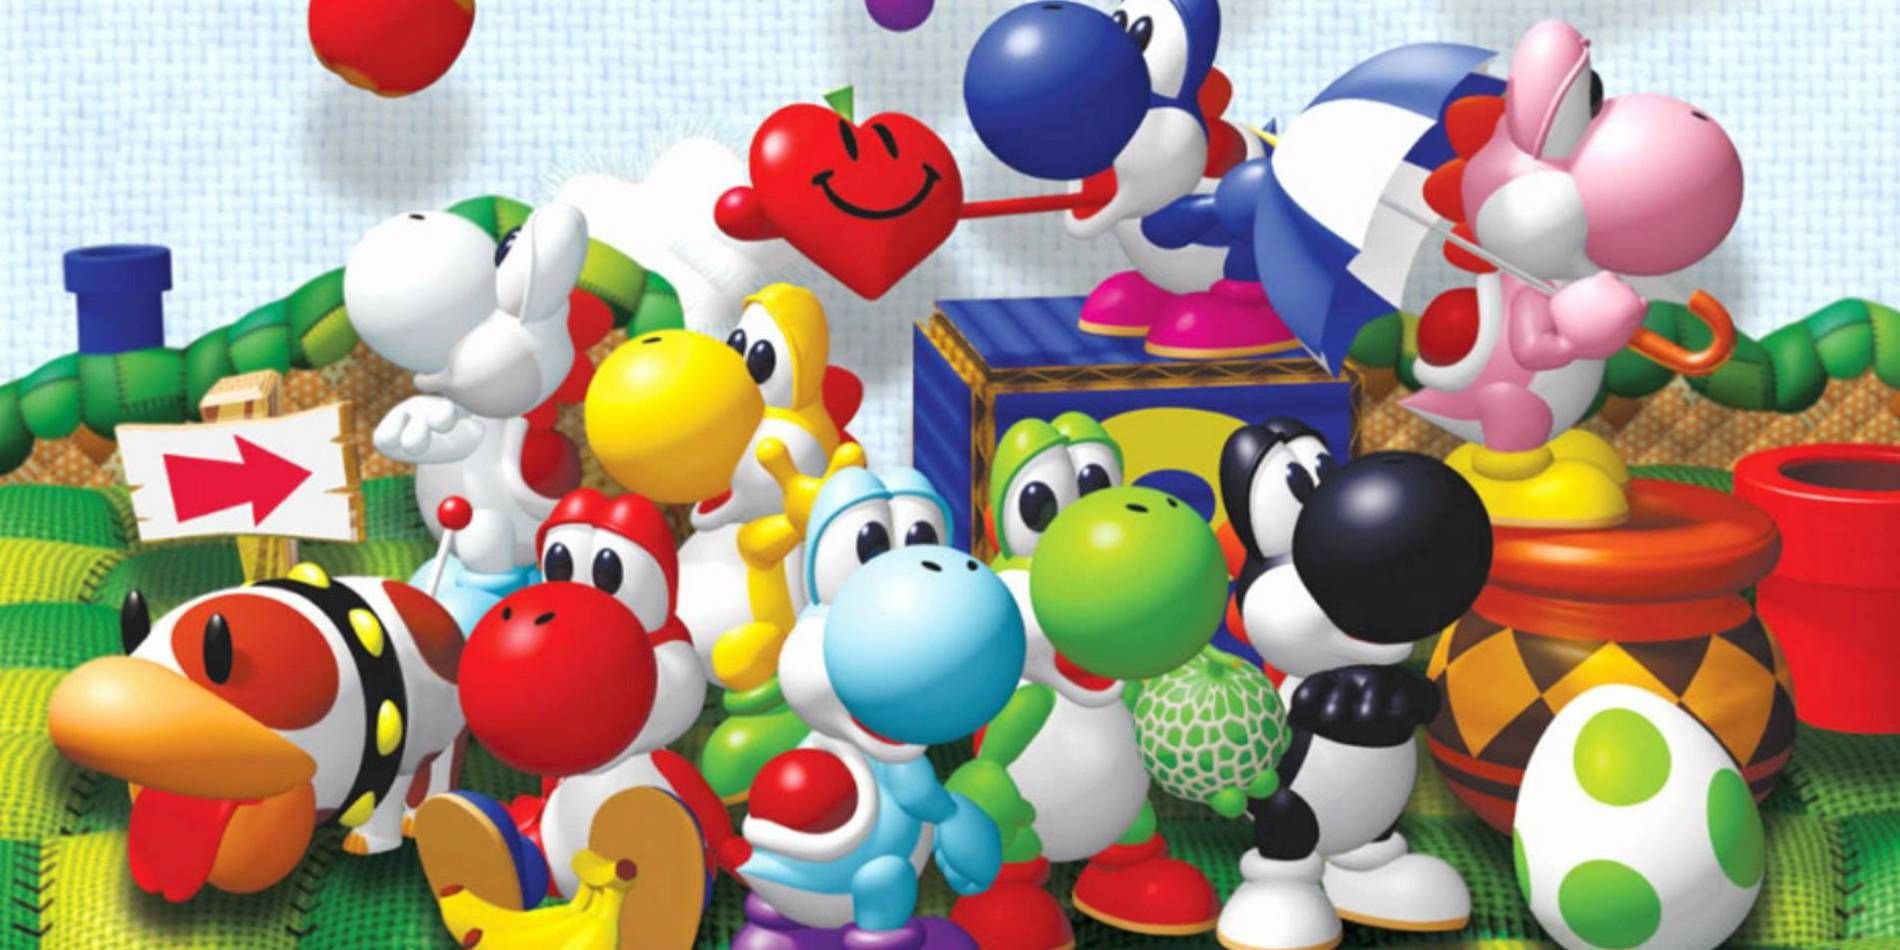 All Baby Yoshi's together in Yoshi's Story